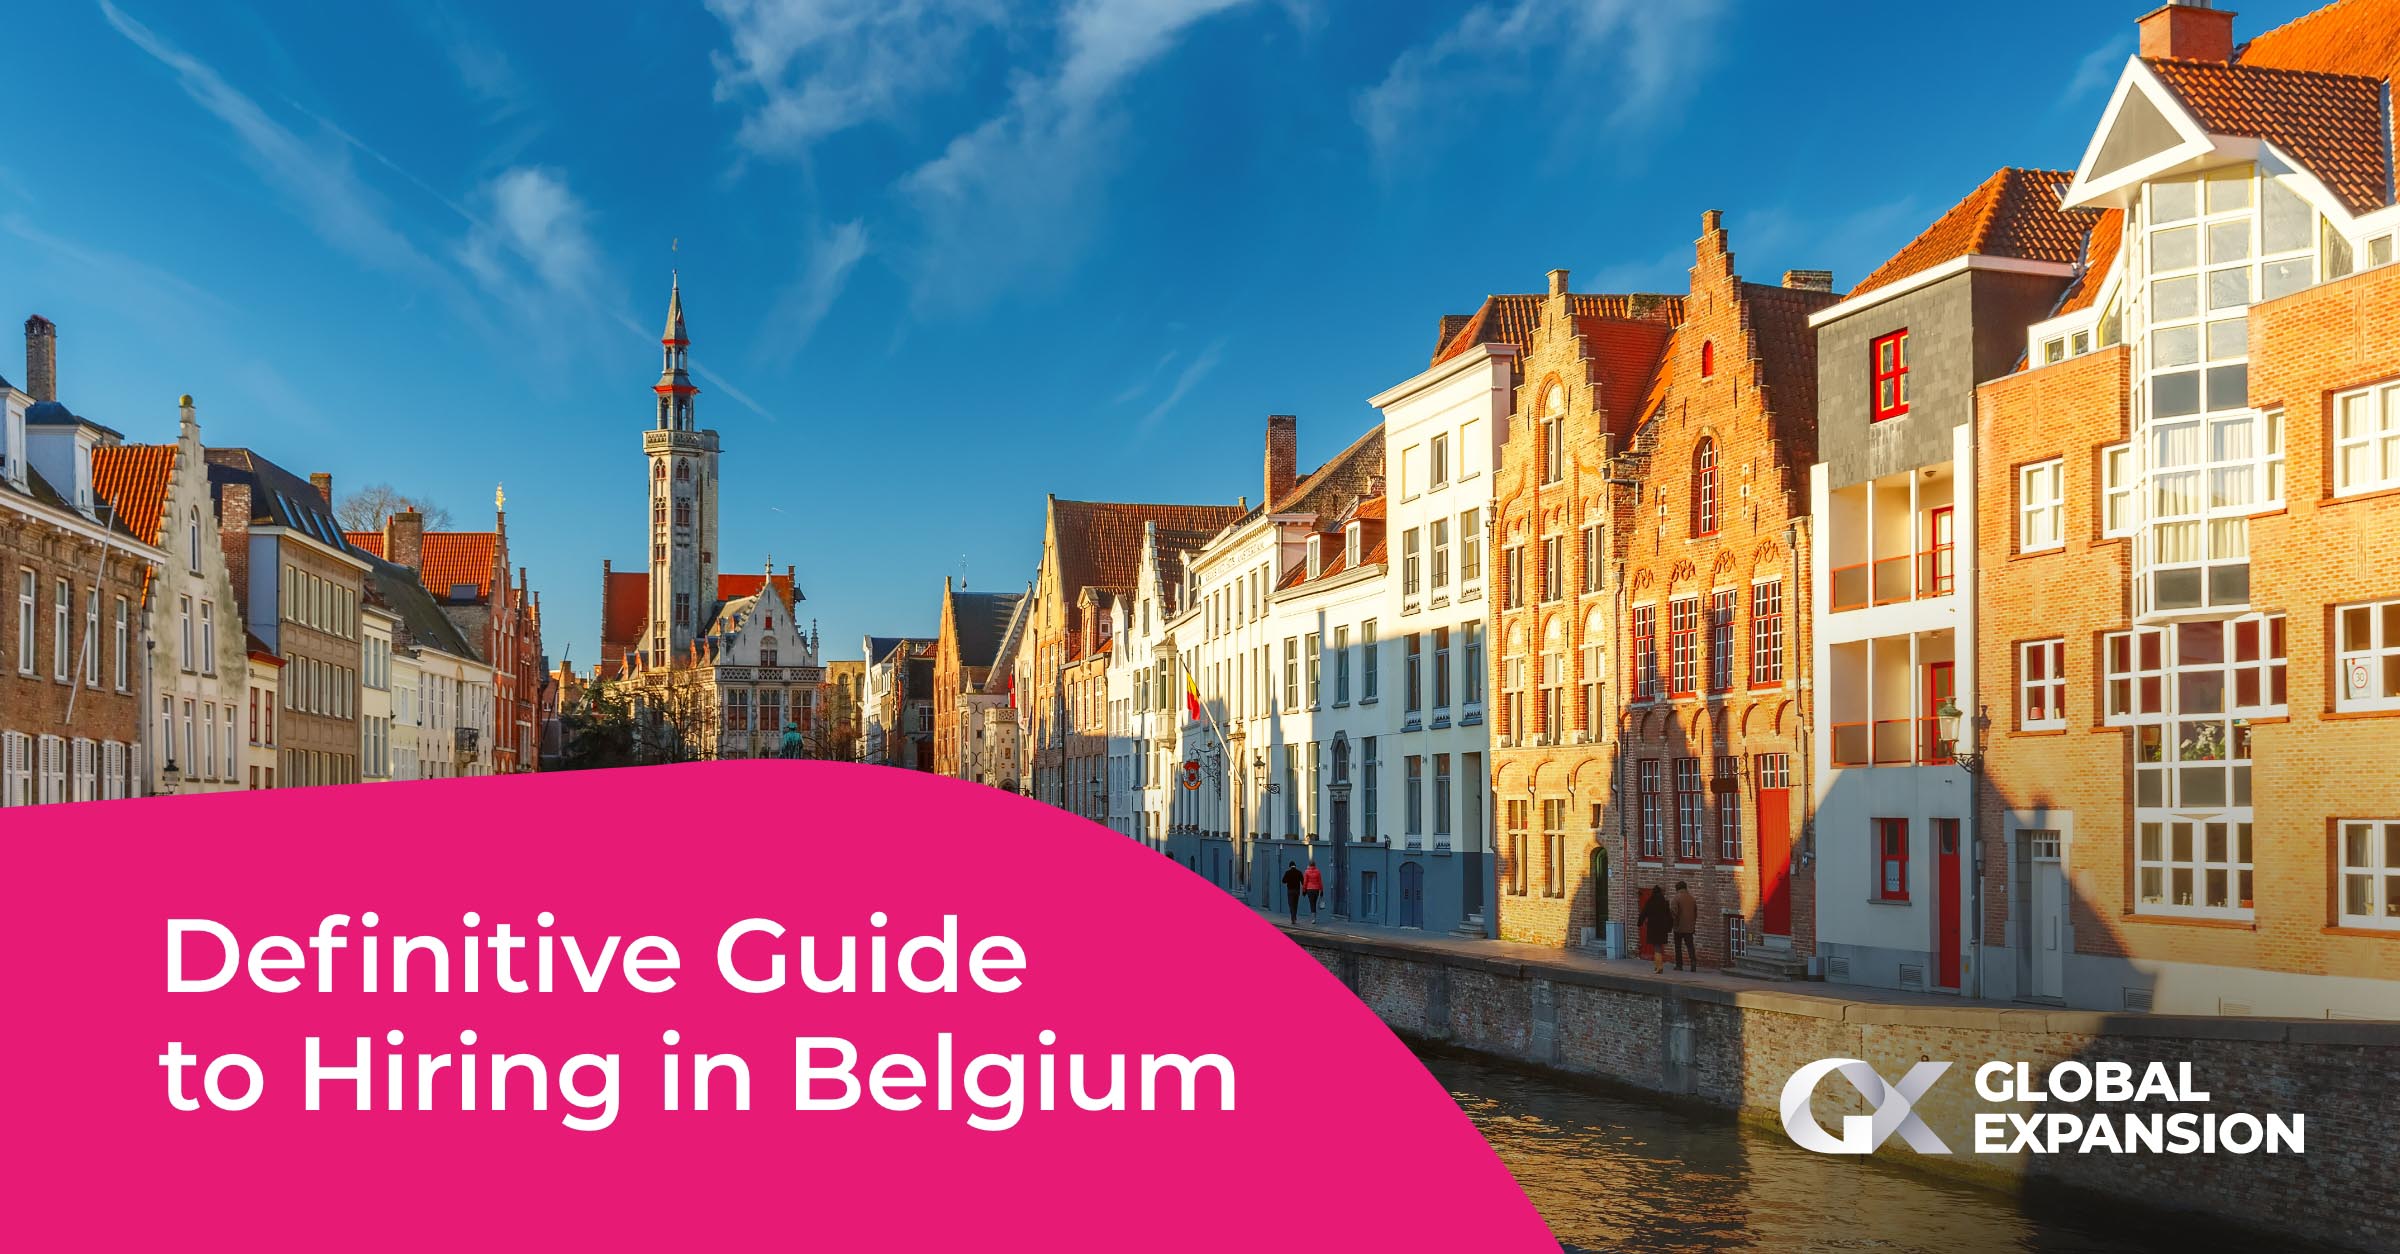 Definitive guide to hiring in Belgium | Global Expansion